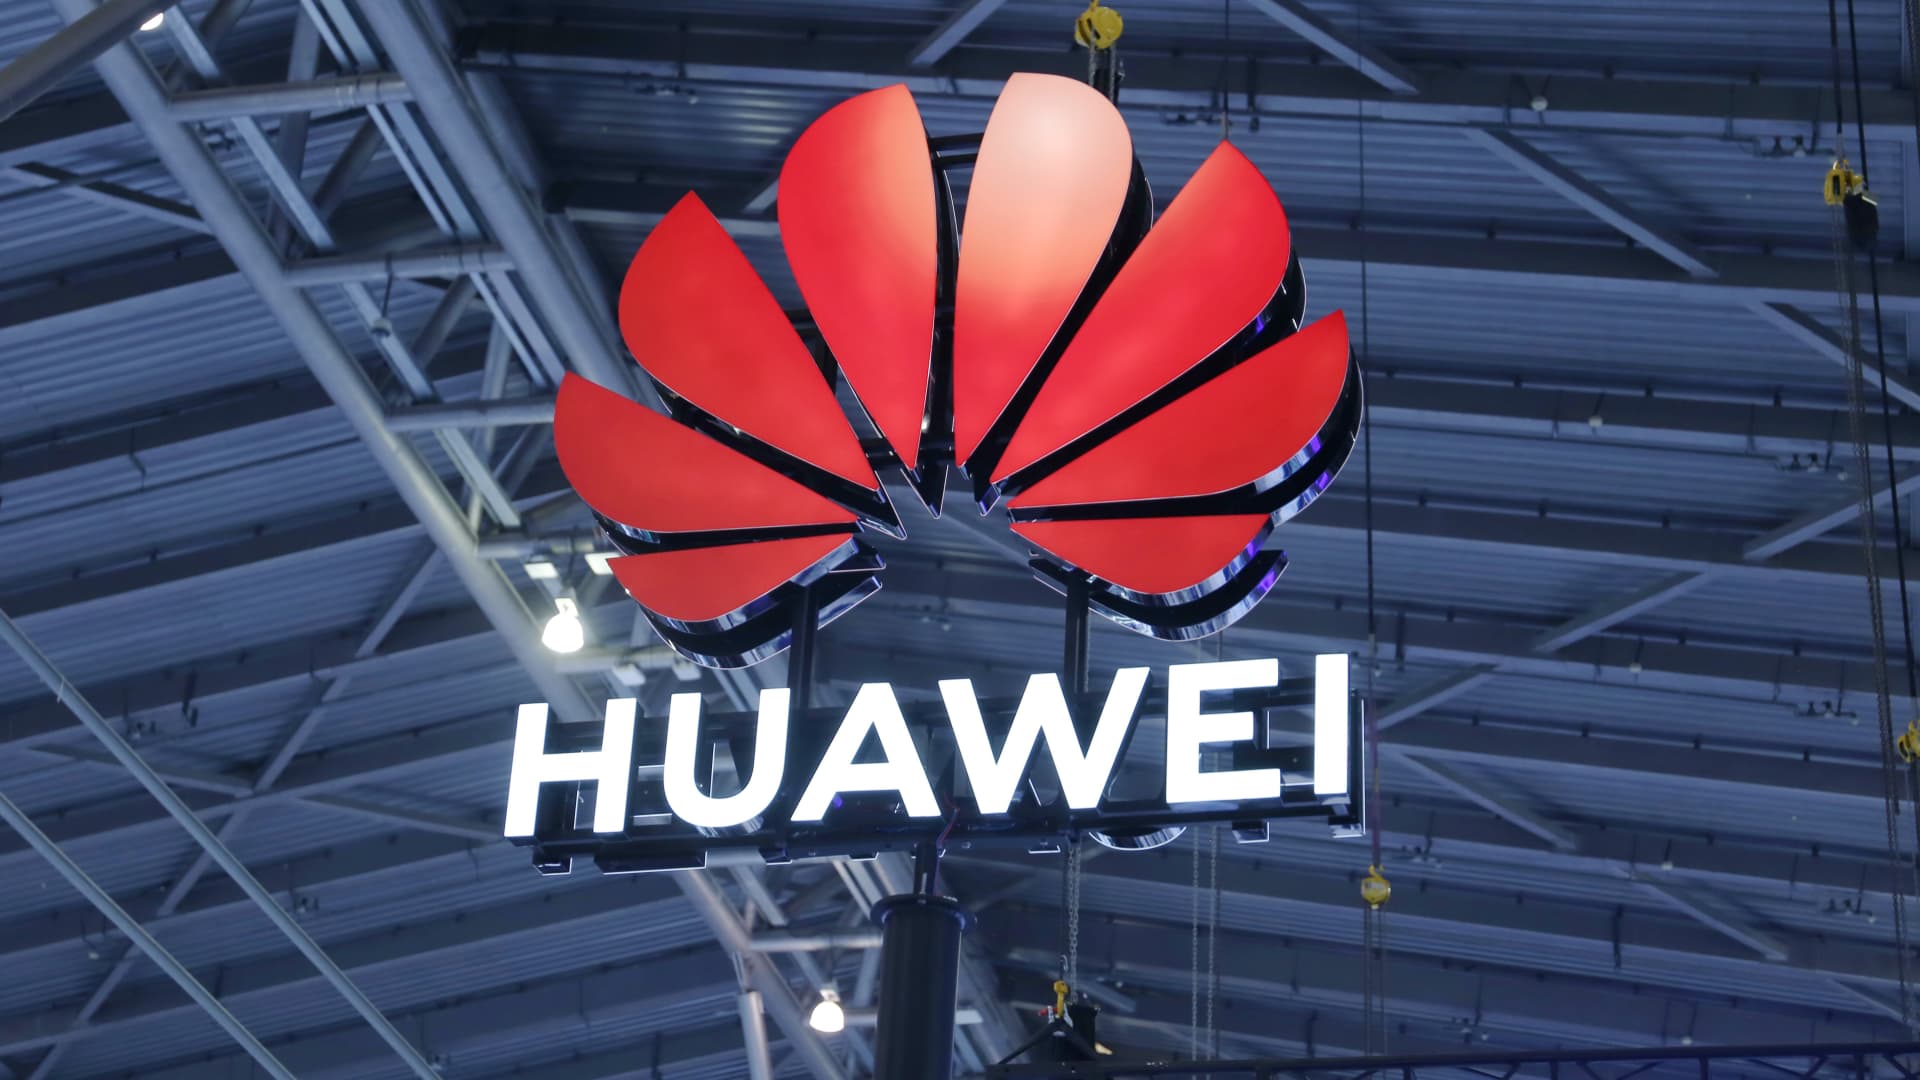 Uncertainty looms for Huawei and U.S. suppliers amidst license revocation (Credits: CNBC)